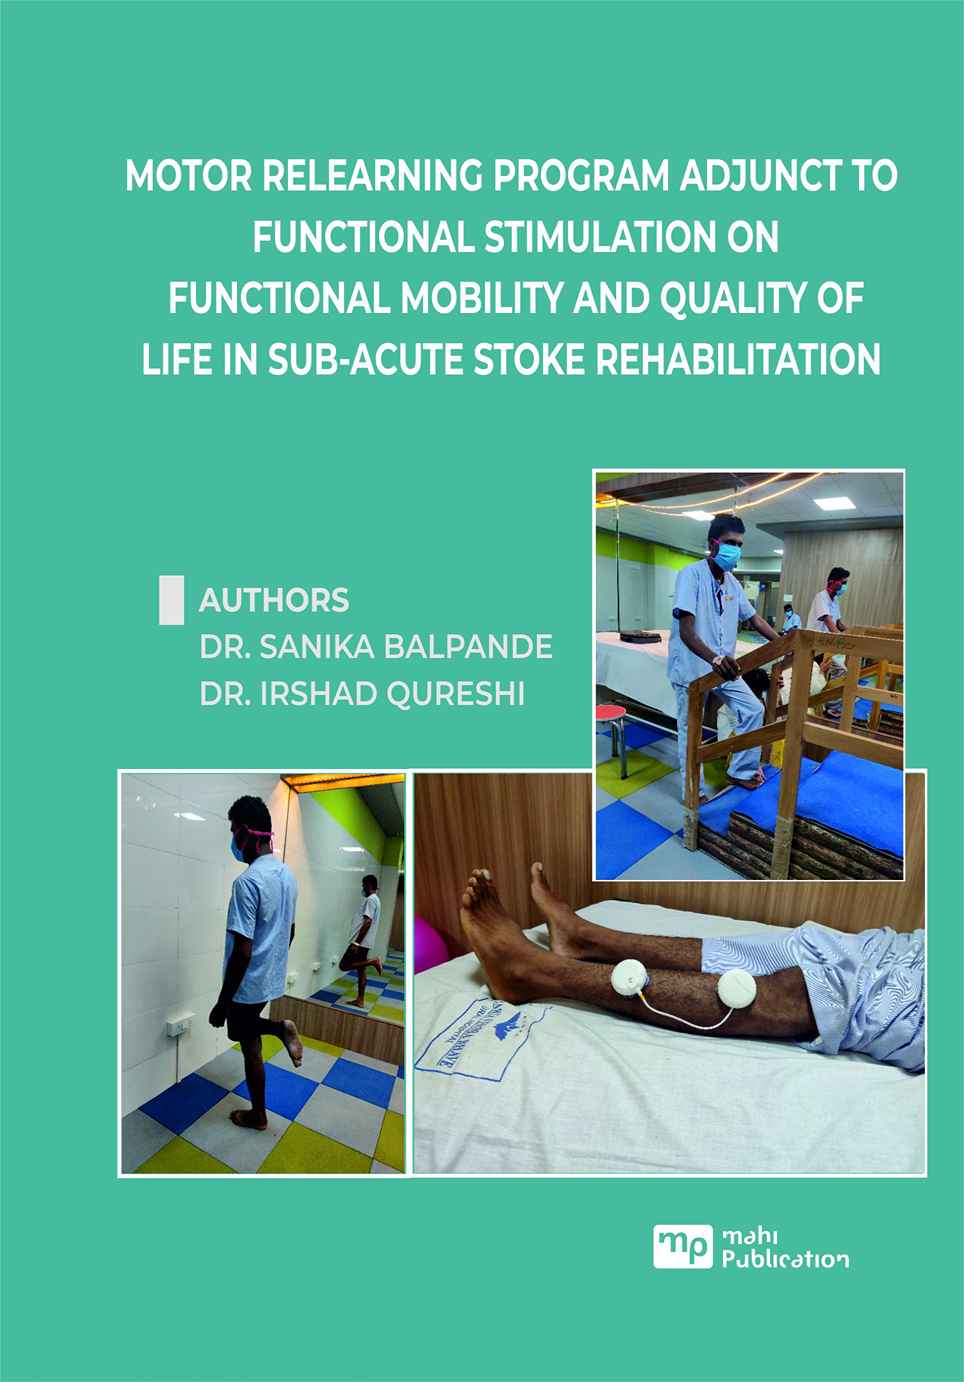 Motor Relearning Program Adjunct To Functional Stimulation On Functional Mobility And Quality Of Life In Sub-Acute Stoke Rehabilitation